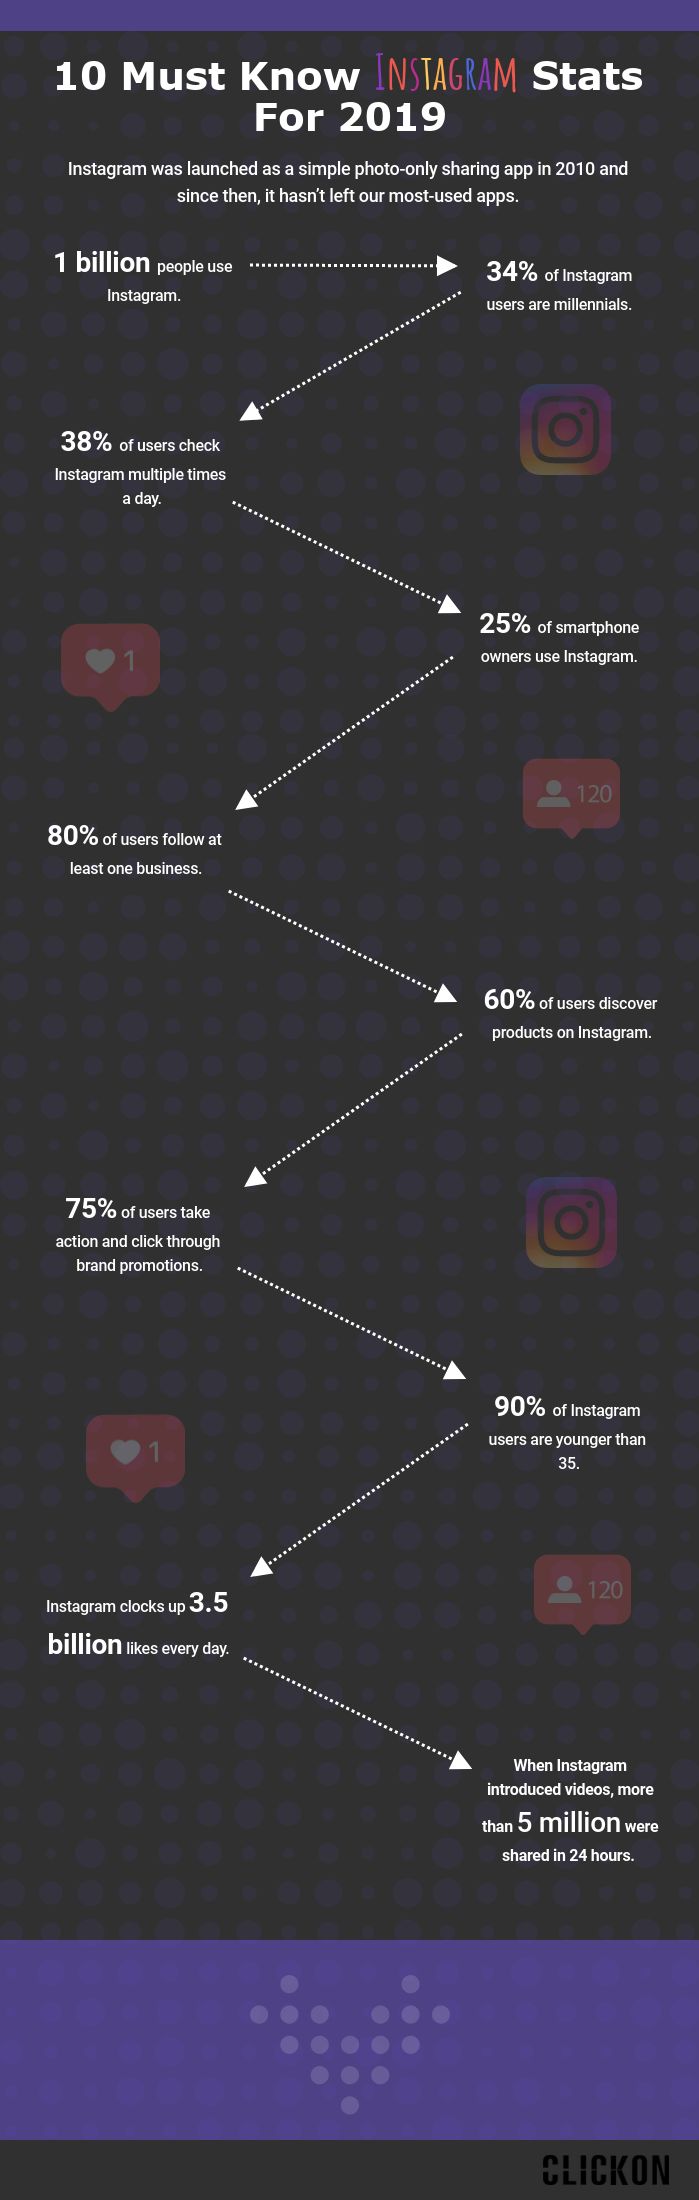 10-must-know-insta-stats